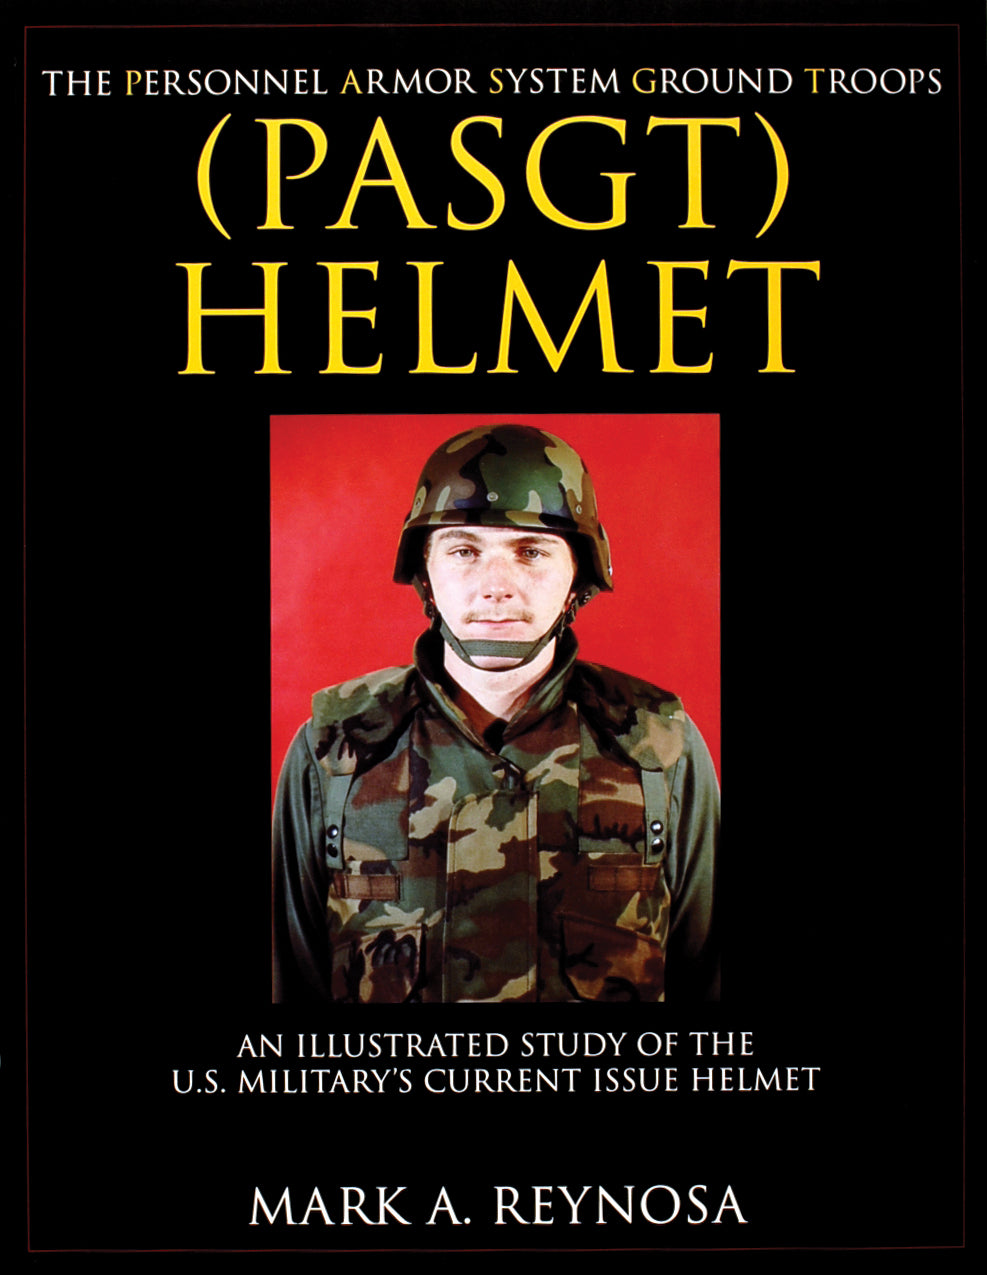 The Personnel Armor System Ground Troops (PASGT) Helmet